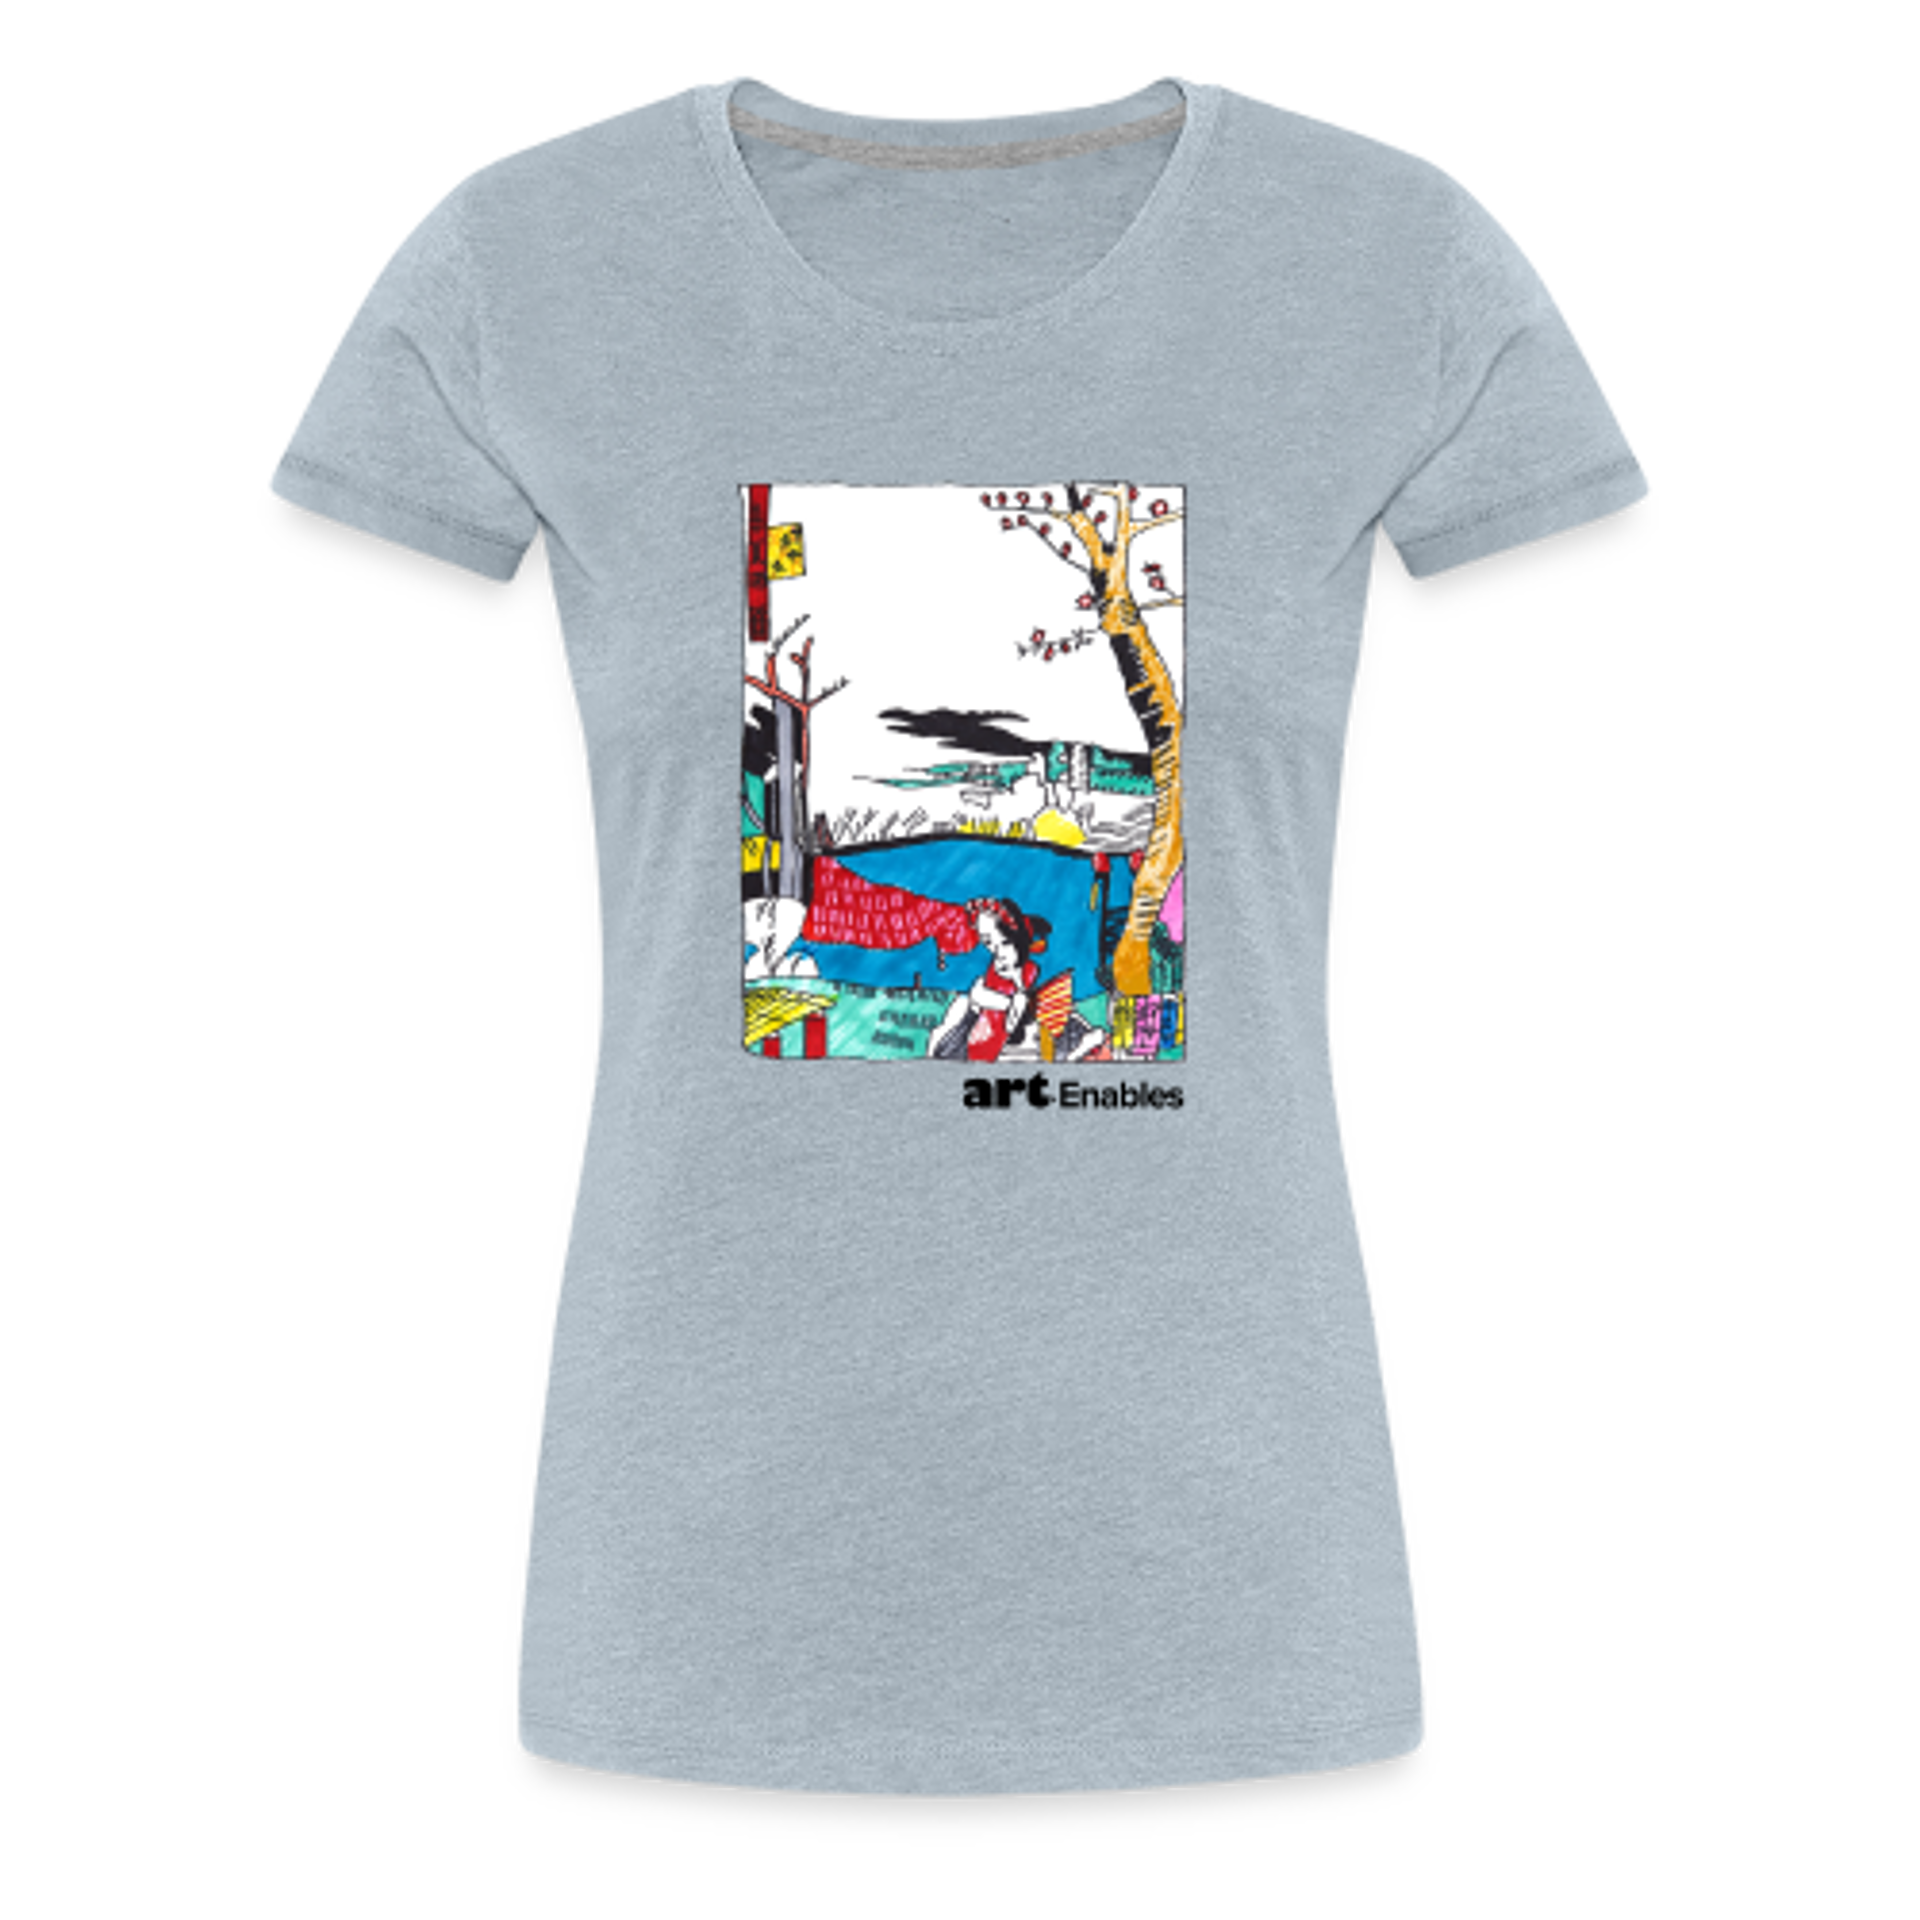 Women's T-shirt (artwork by Charles Meissner) Small - heather ice blue by Art Enables Merchandise